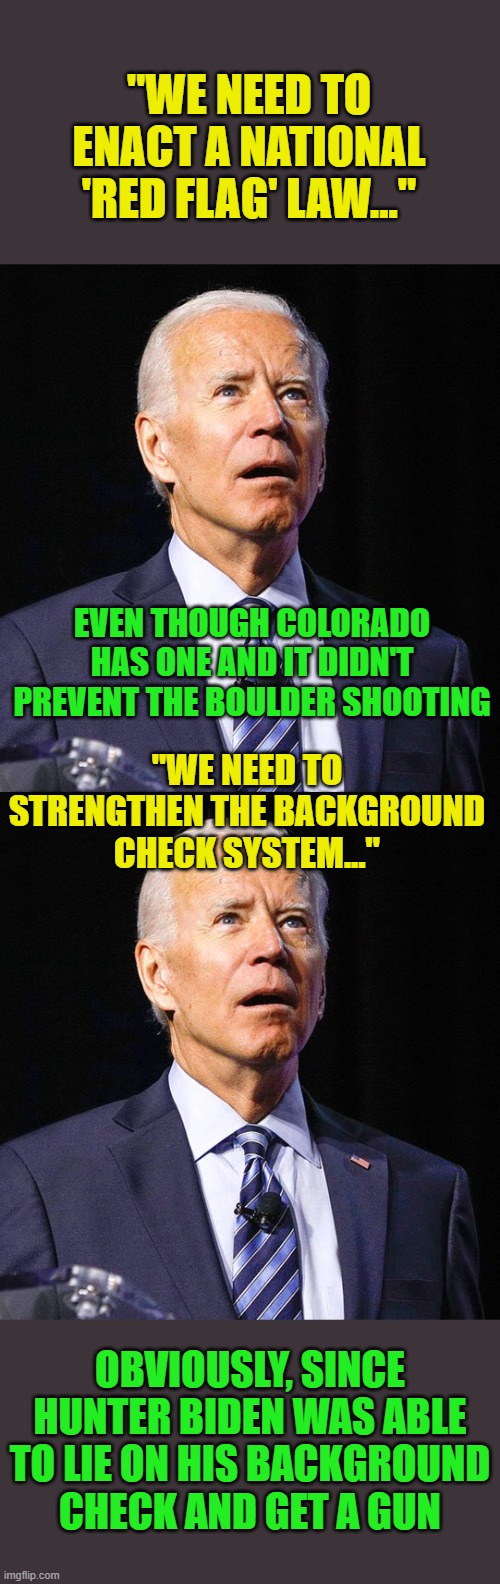 More feel good BS from the drooler in chief. | "WE NEED TO ENACT A NATIONAL 'RED FLAG' LAW..."; EVEN THOUGH COLORADO HAS ONE AND IT DIDN'T PREVENT THE BOULDER SHOOTING; "WE NEED TO STRENGTHEN THE BACKGROUND CHECK SYSTEM..."; OBVIOUSLY, SINCE HUNTER BIDEN WAS ABLE TO LIE ON HIS BACKGROUND CHECK AND GET A GUN | image tagged in joe biden | made w/ Imgflip meme maker